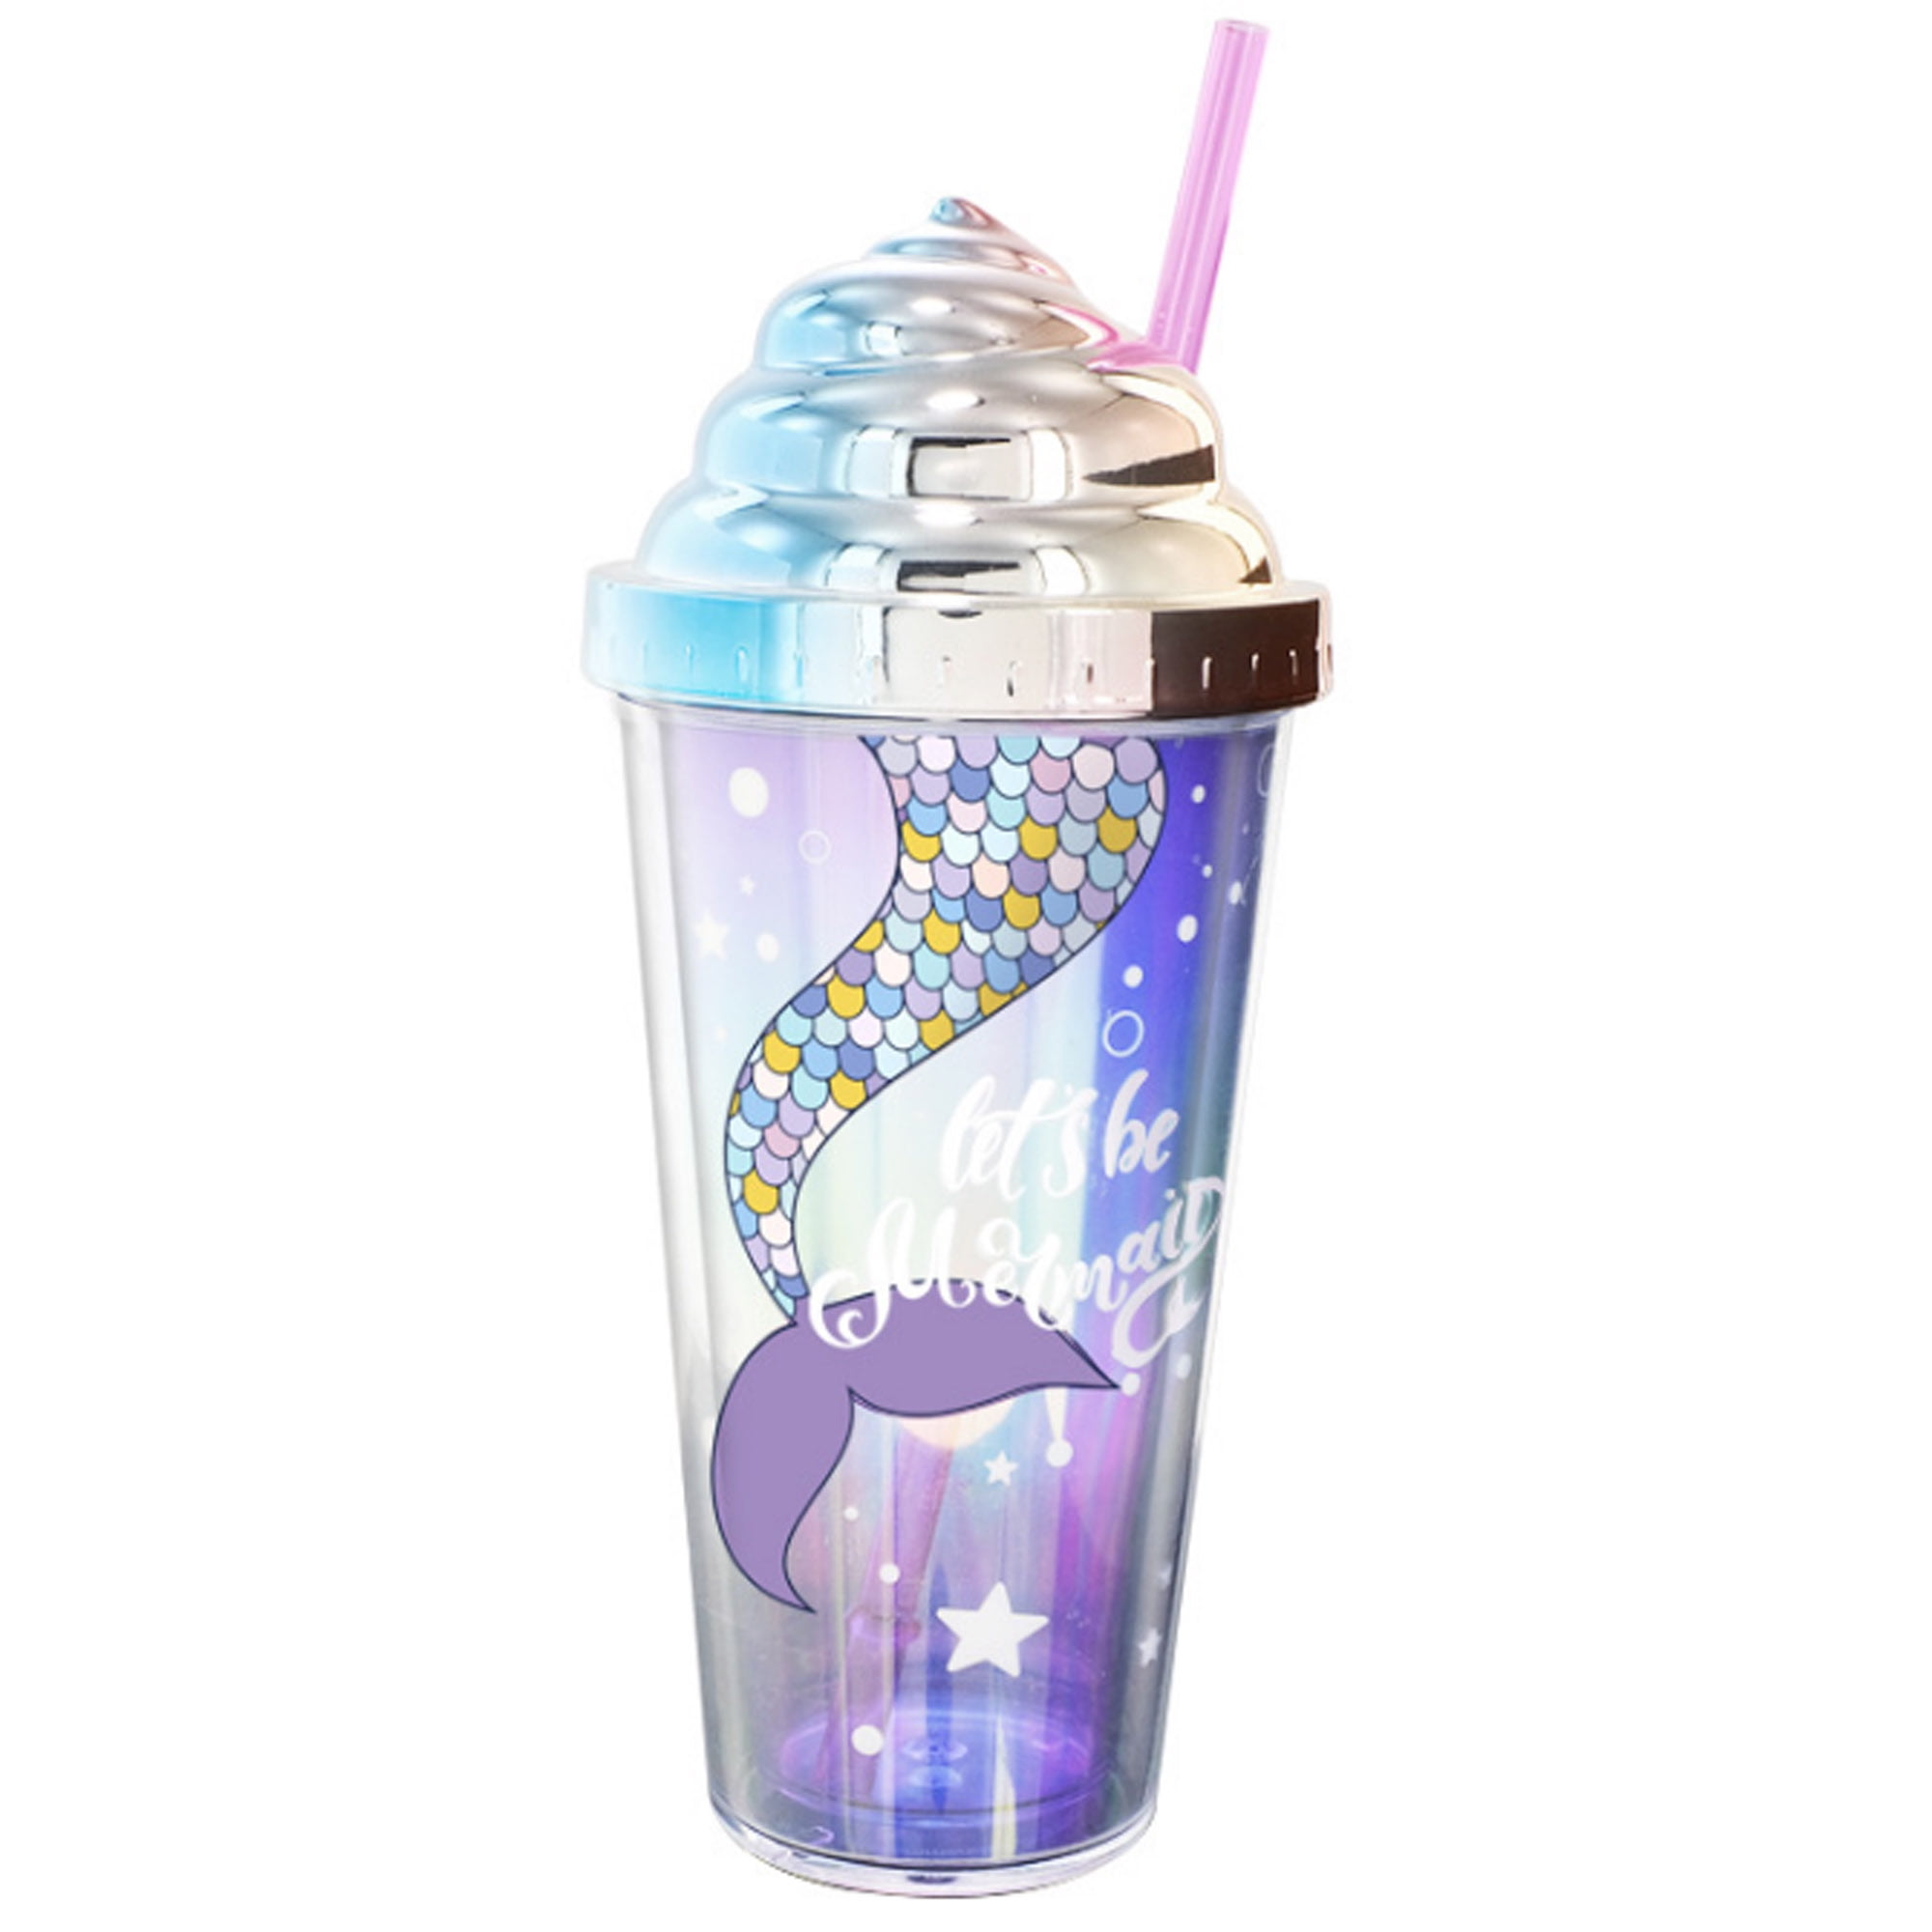 New Design Pink Mermaid & Unicorn Plastic Cup Tumbler with Lid & Spiral Straw 